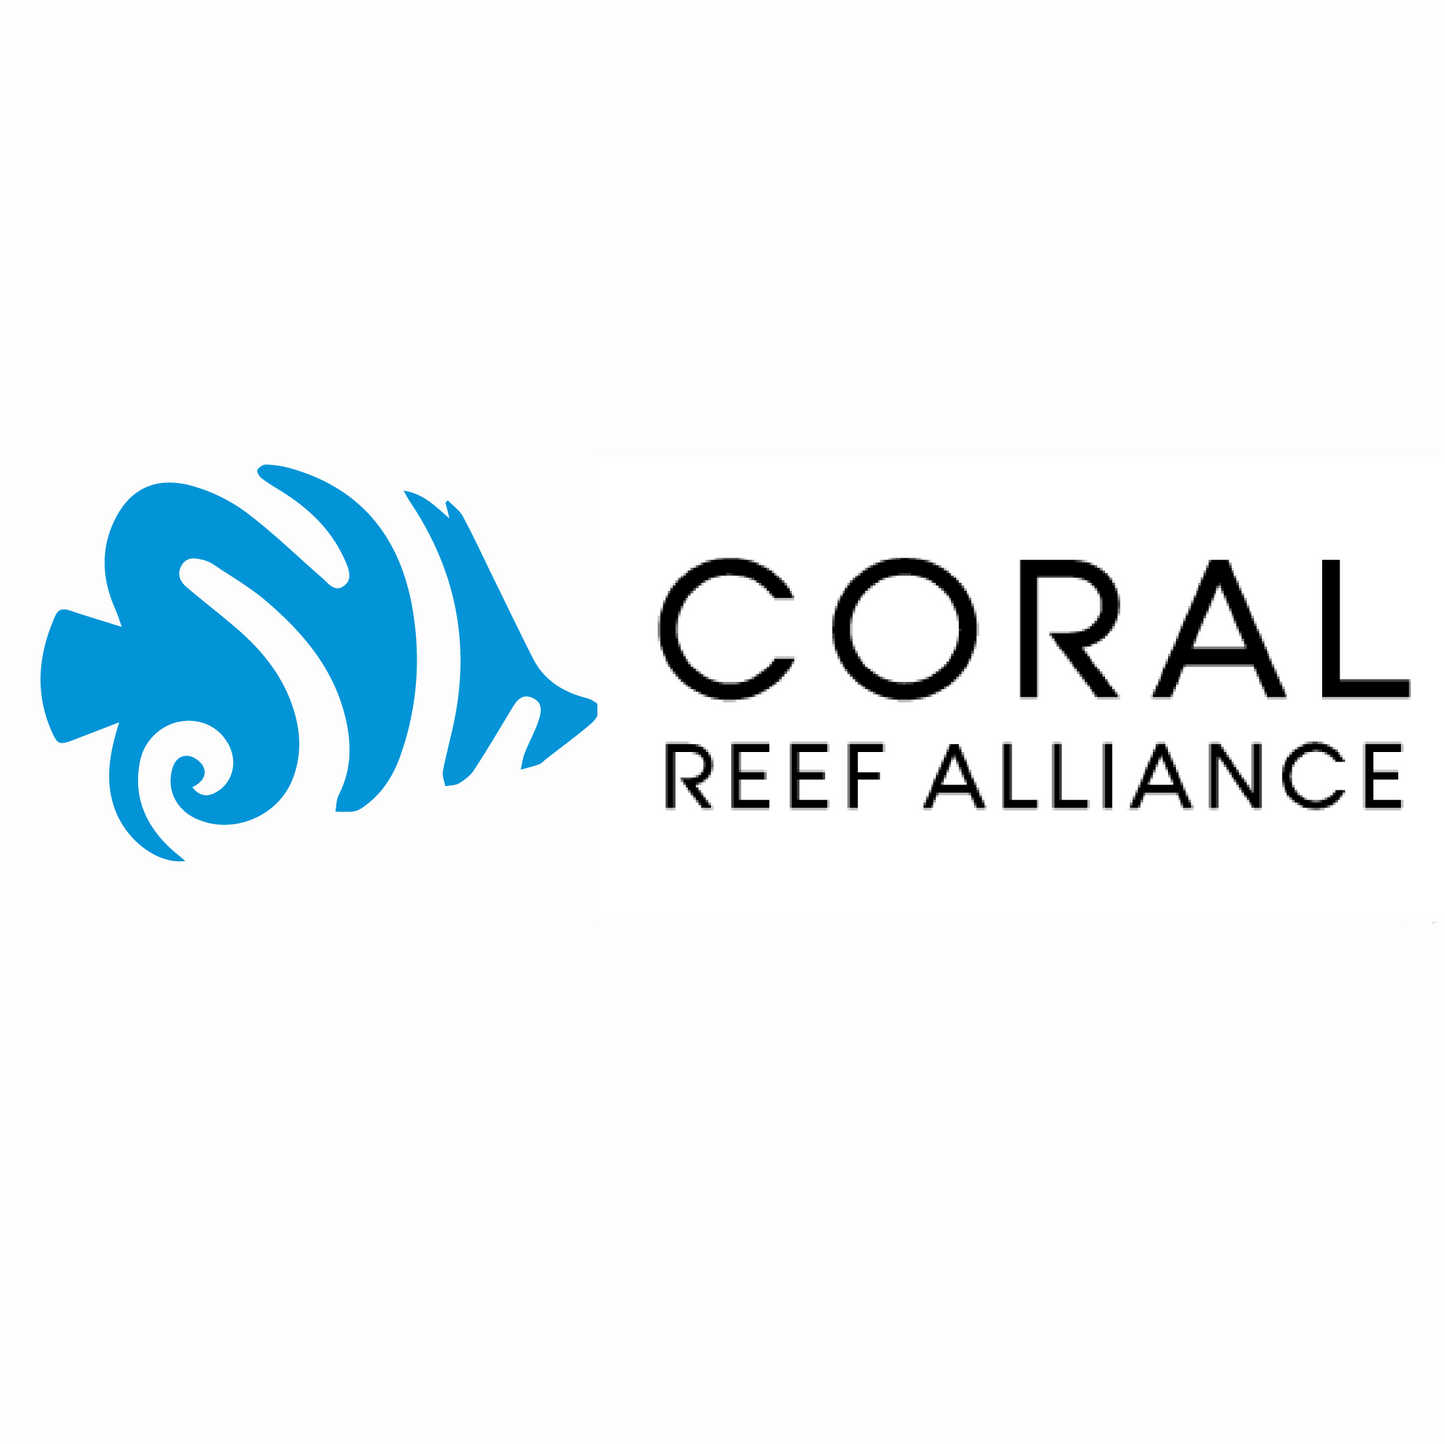 Support the Coral Reef Alliance